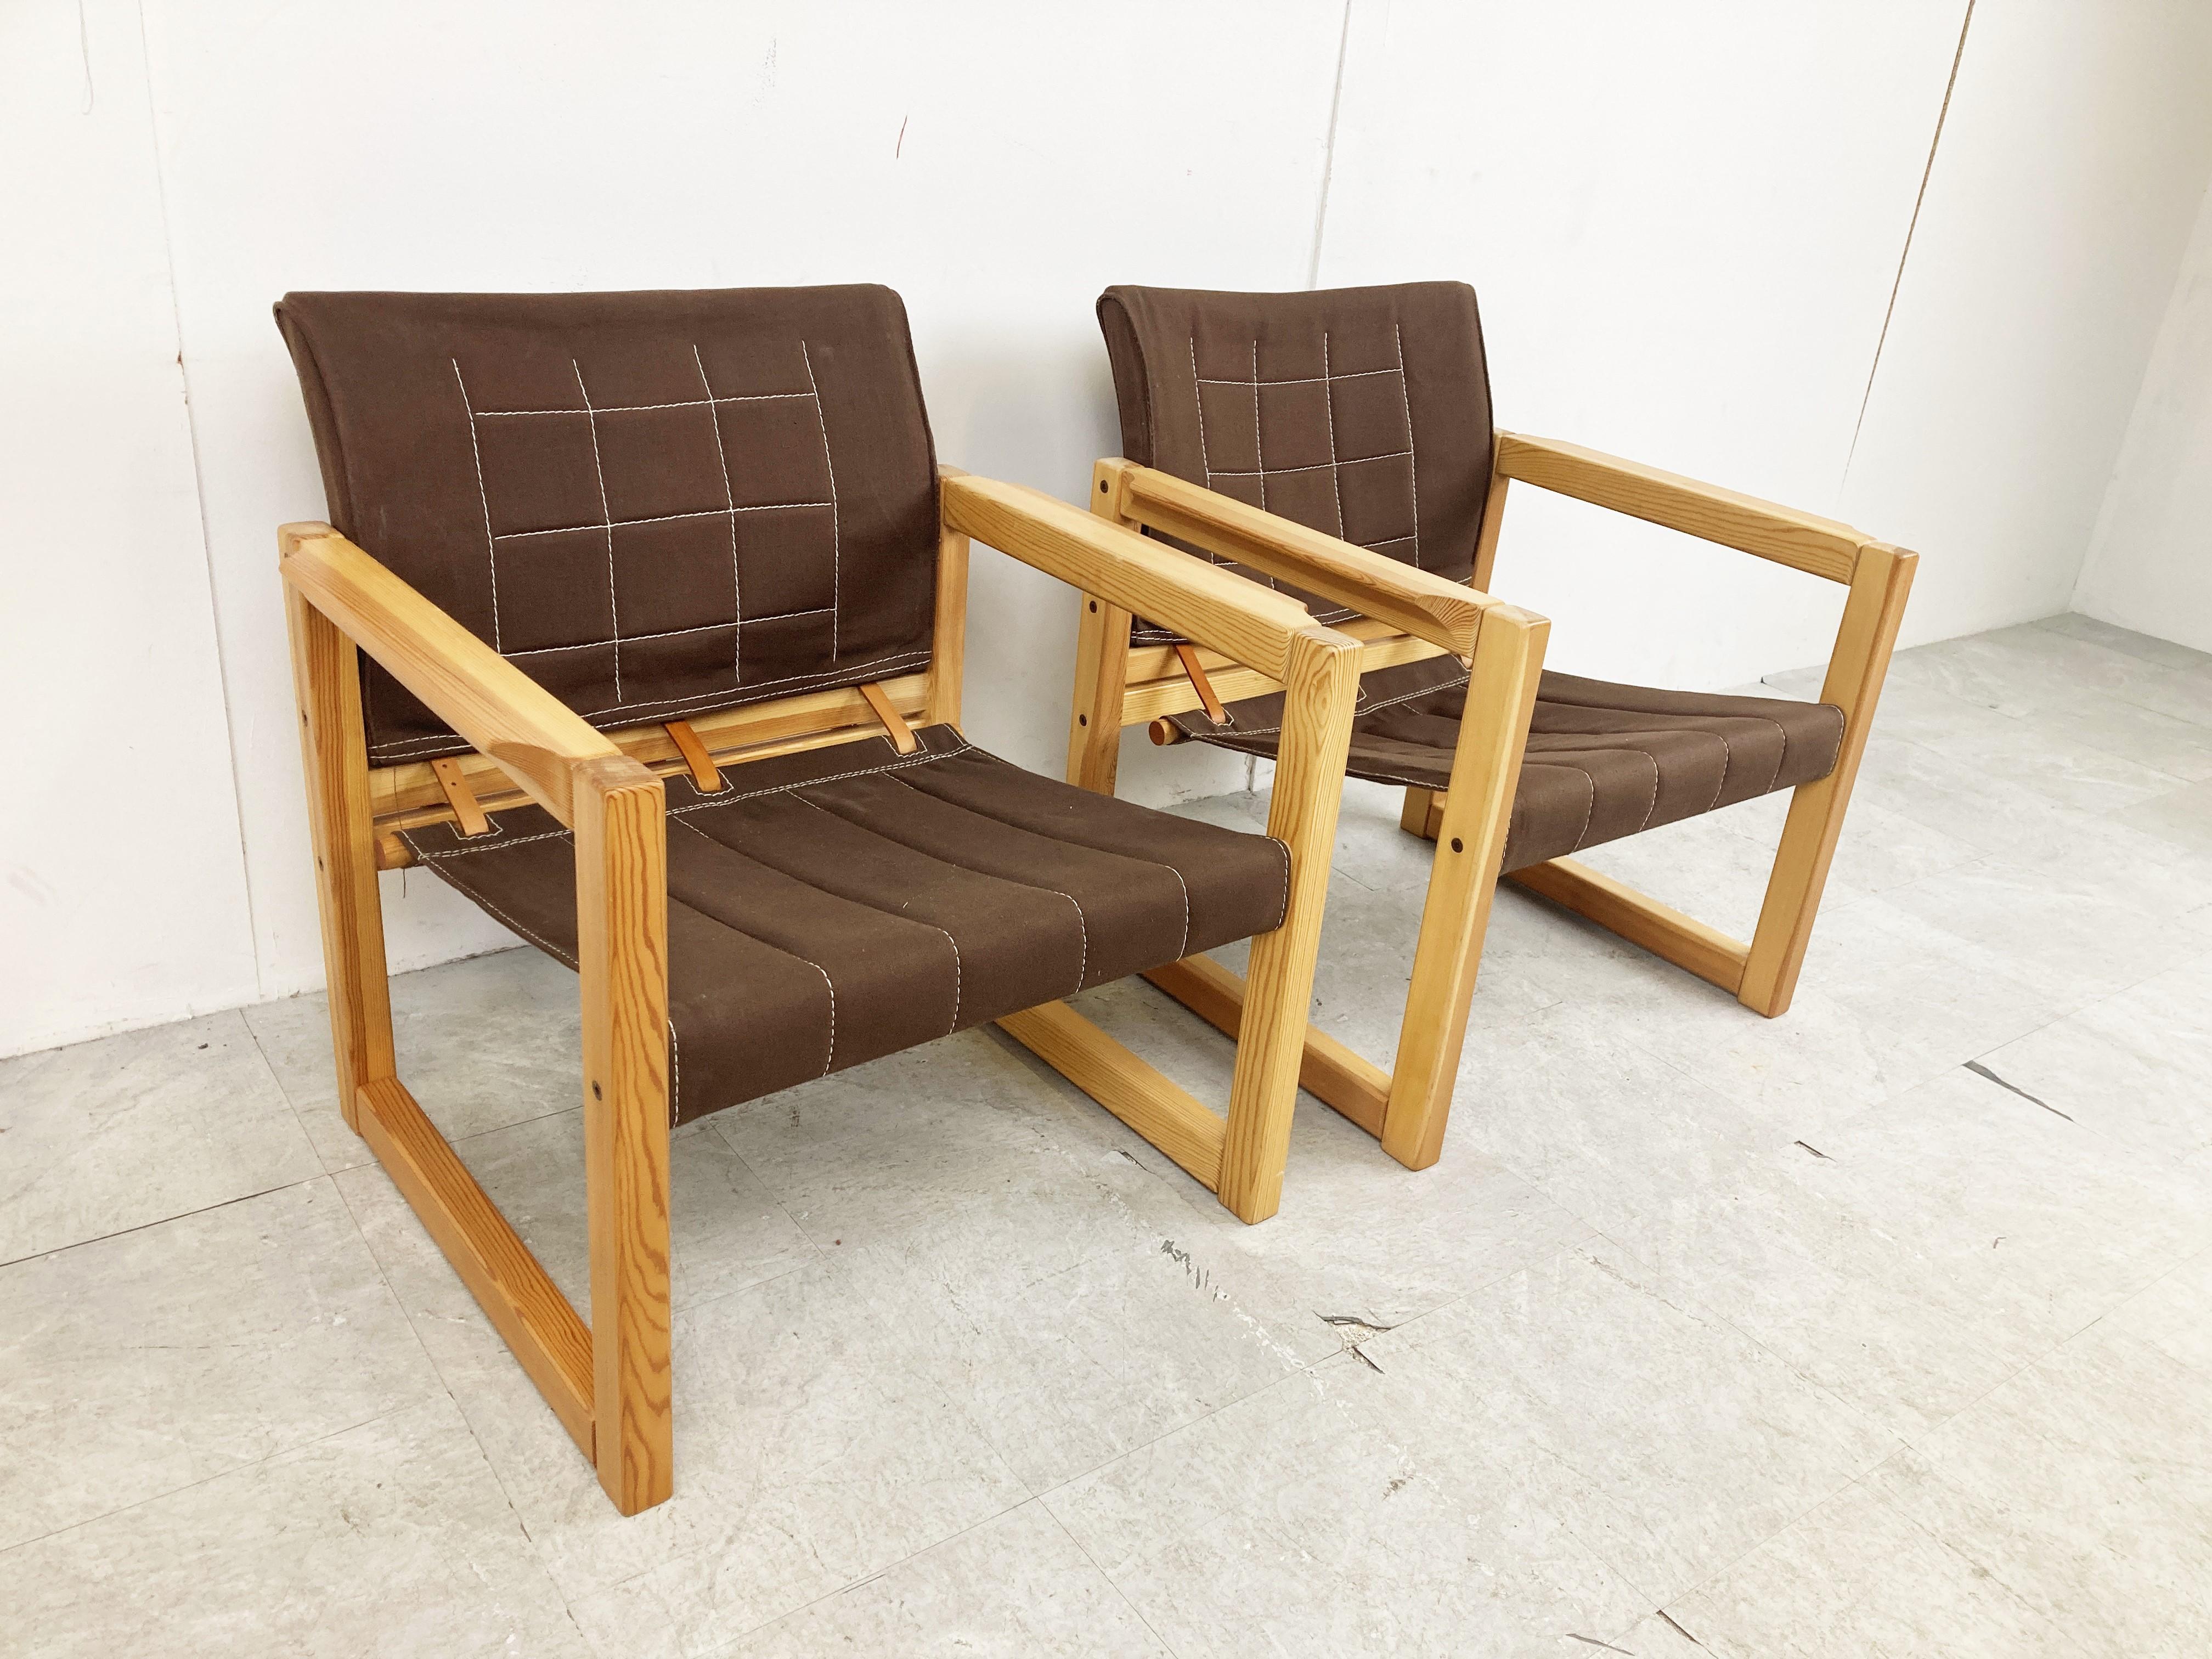 Swedish Pair of Diana Armchairs Designed by Karin Mobring for Ikea, 1980s For Sale